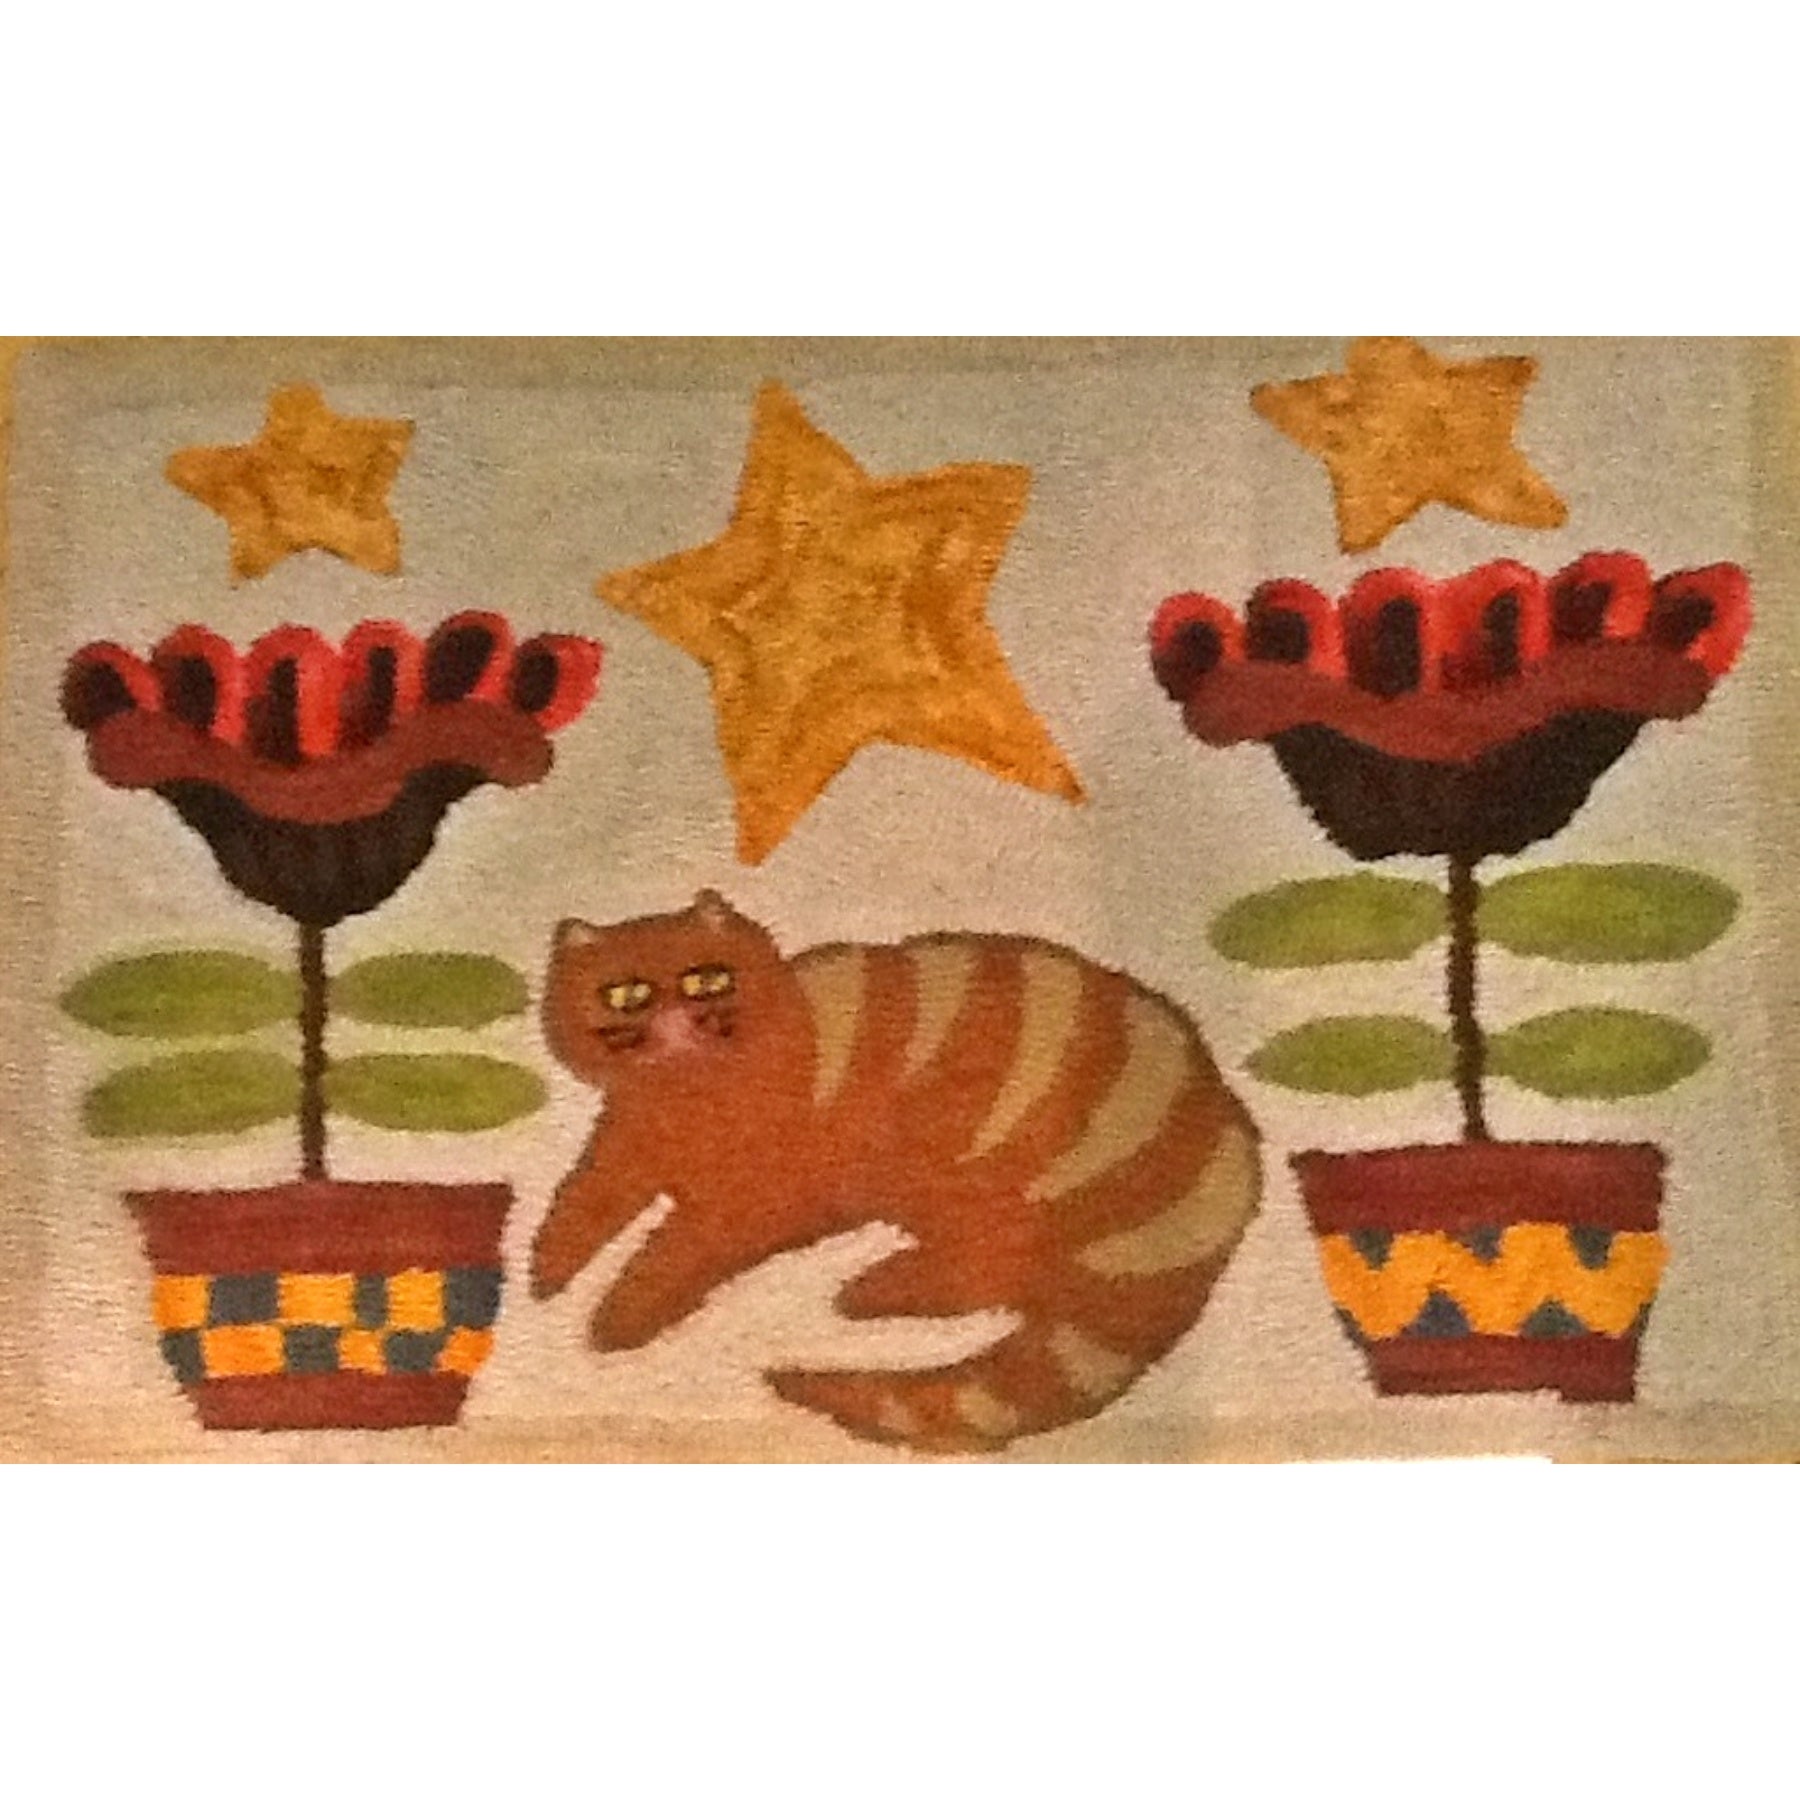 Tiger In Pots, rug hooked by Patricia Boysen